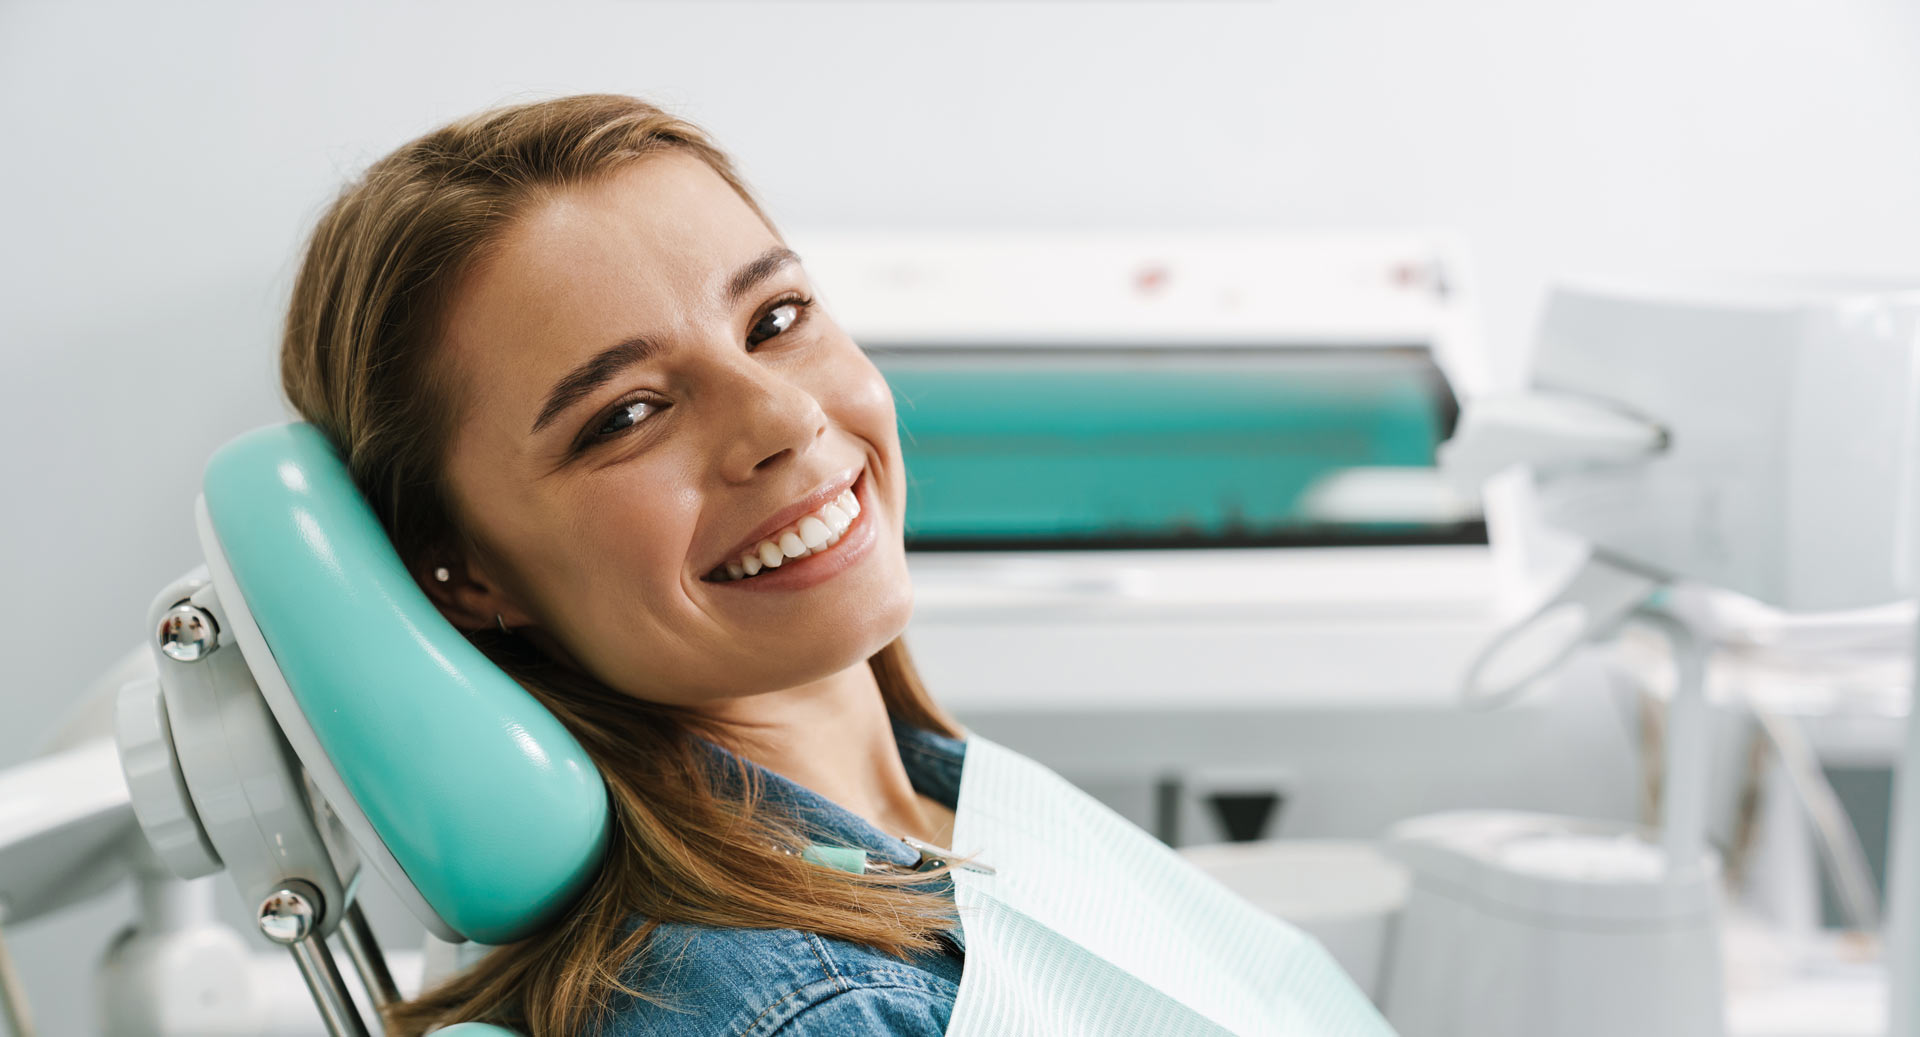 3 reasons to treat yourself to tooth whitening